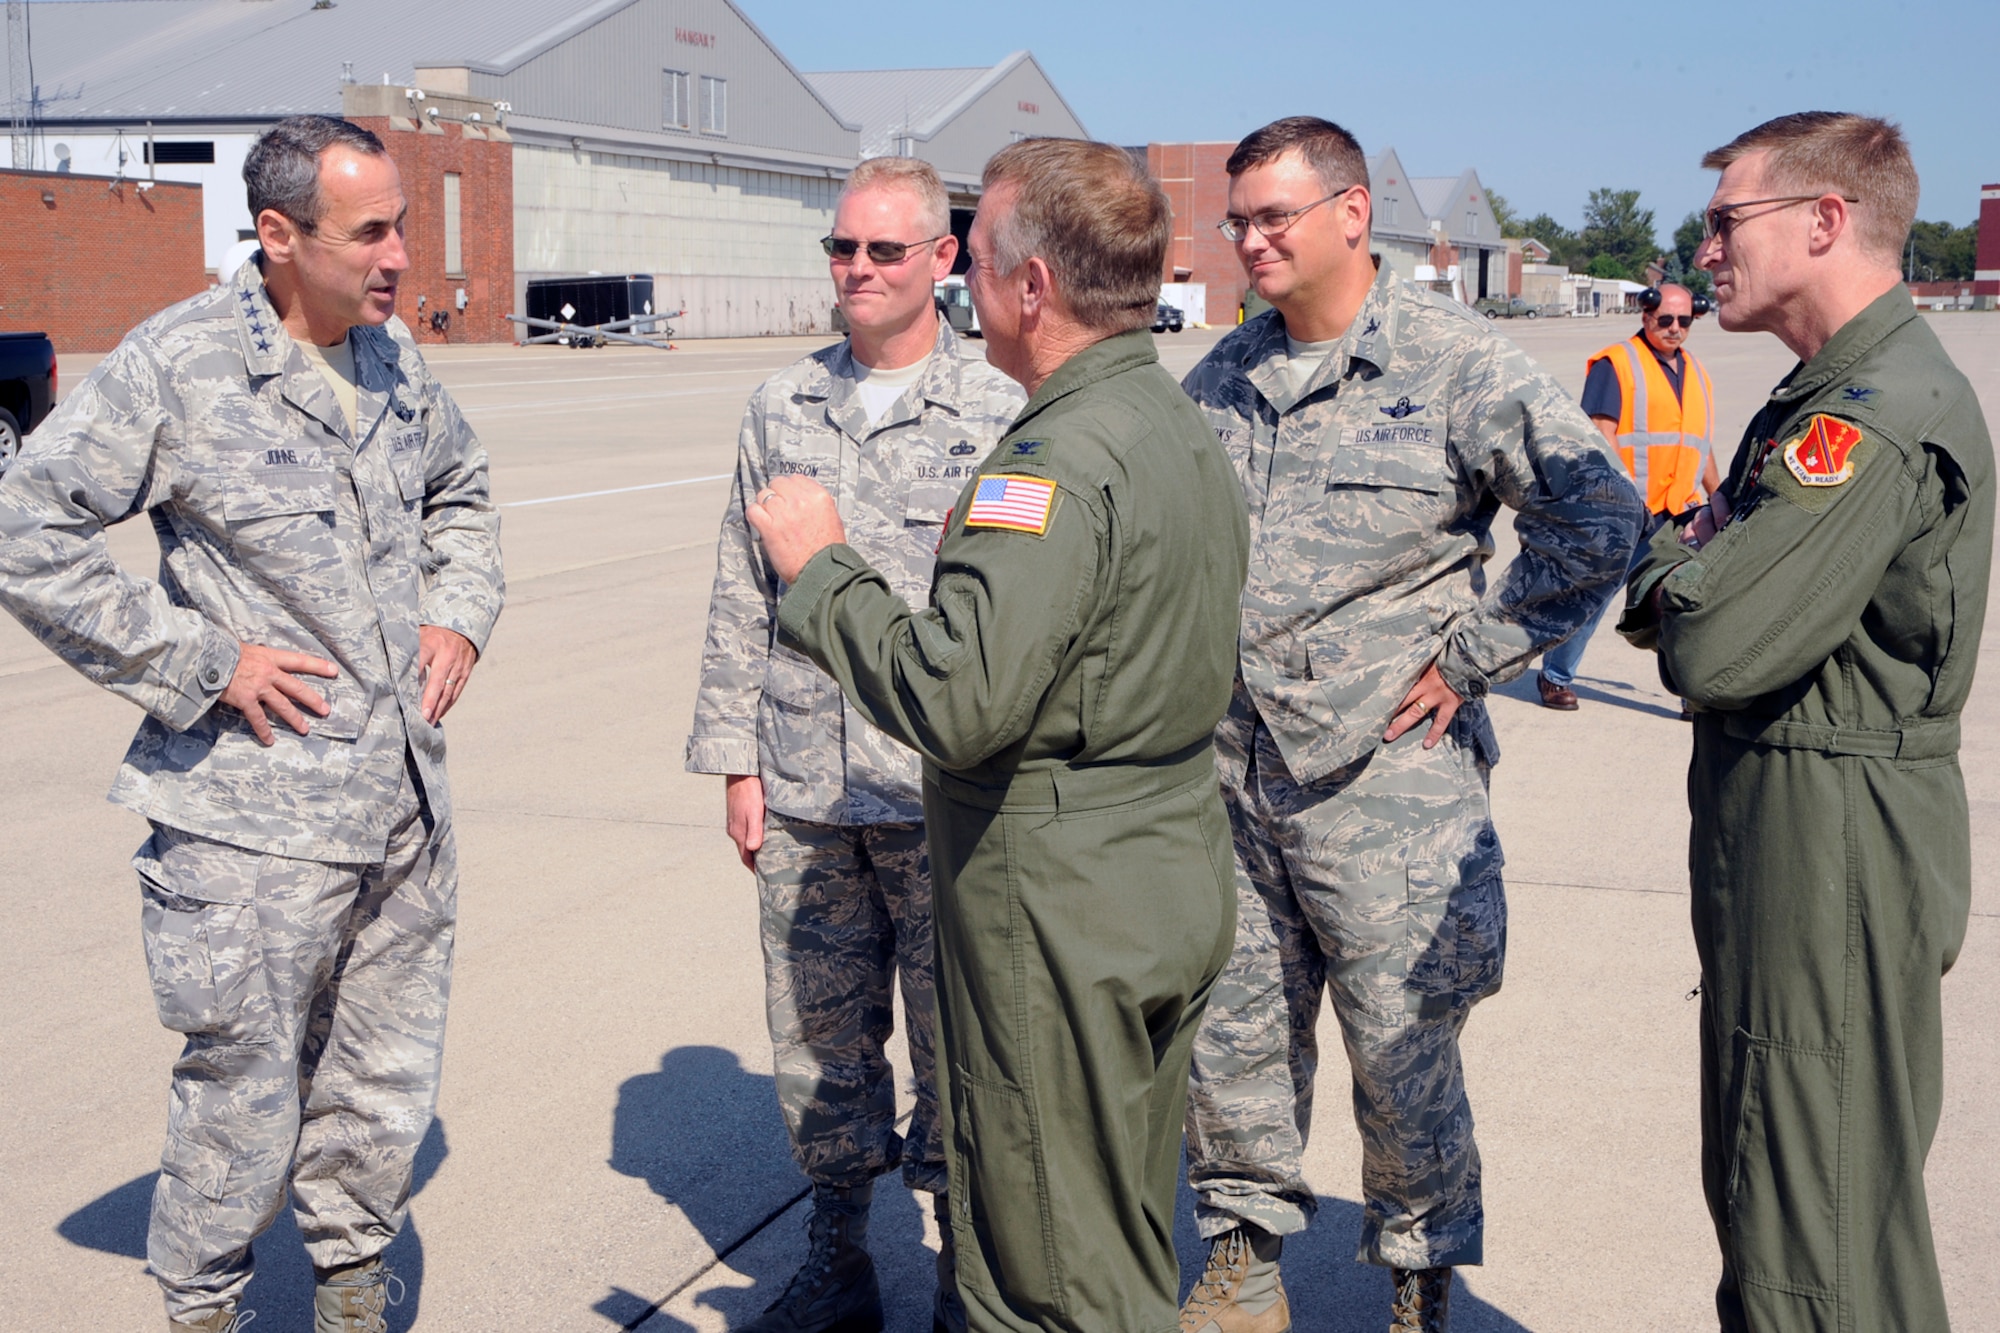 Senior members of the 127th Wing welcome Gen. Raymond E. Johns, commander of Air Mobility Command to Selfridge Air National Guard Base, Mich., Aug. 23, 2012. The Selfridge leaders presented their case to Johns for locating possible future aircraft missions at the Michigan base. Greeting the general are CMSgt. Robert Dobson, 127th Wing command chief; Col. David Brooks, 127th Air Refueling Group commander; Col. Philip Sheridan, 127th Wing vice commander; and Col. Michael Thomas, 127th Wing commander. (Air National
Guard photo by John S. Swanson)
